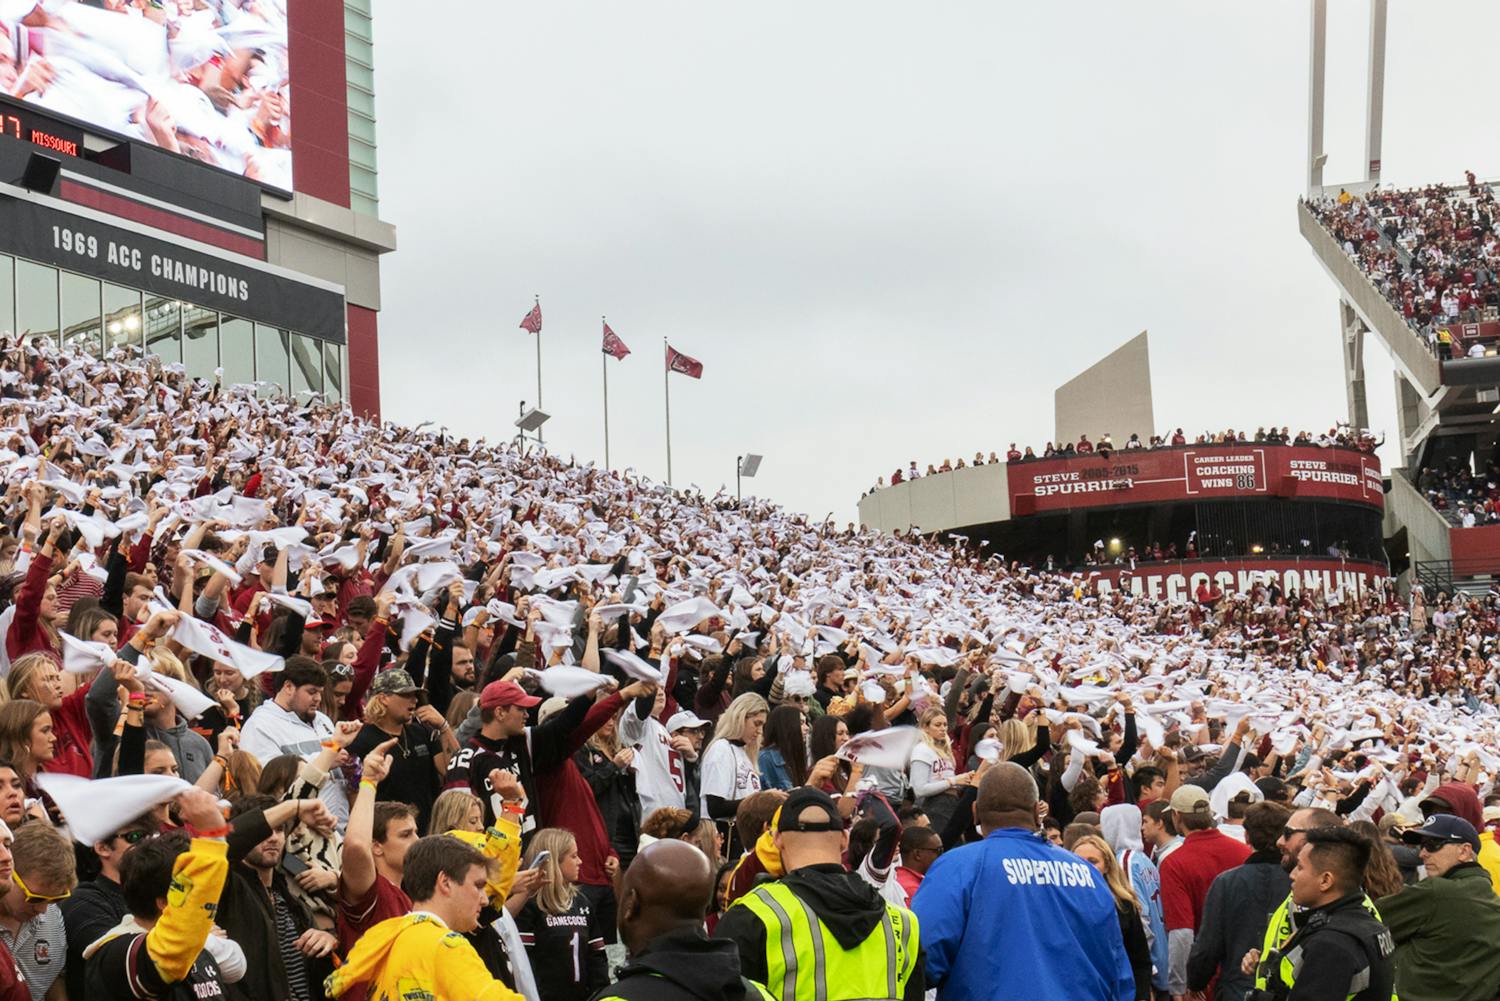 FILE — The University of South Carolina's ɫɫƵ section spins rally towels as "Sandstorm" plays over the loudspeakers on Oct. 29, 2022. The ɫɫƵs lost to the University of Missouri Tigers 23-10.